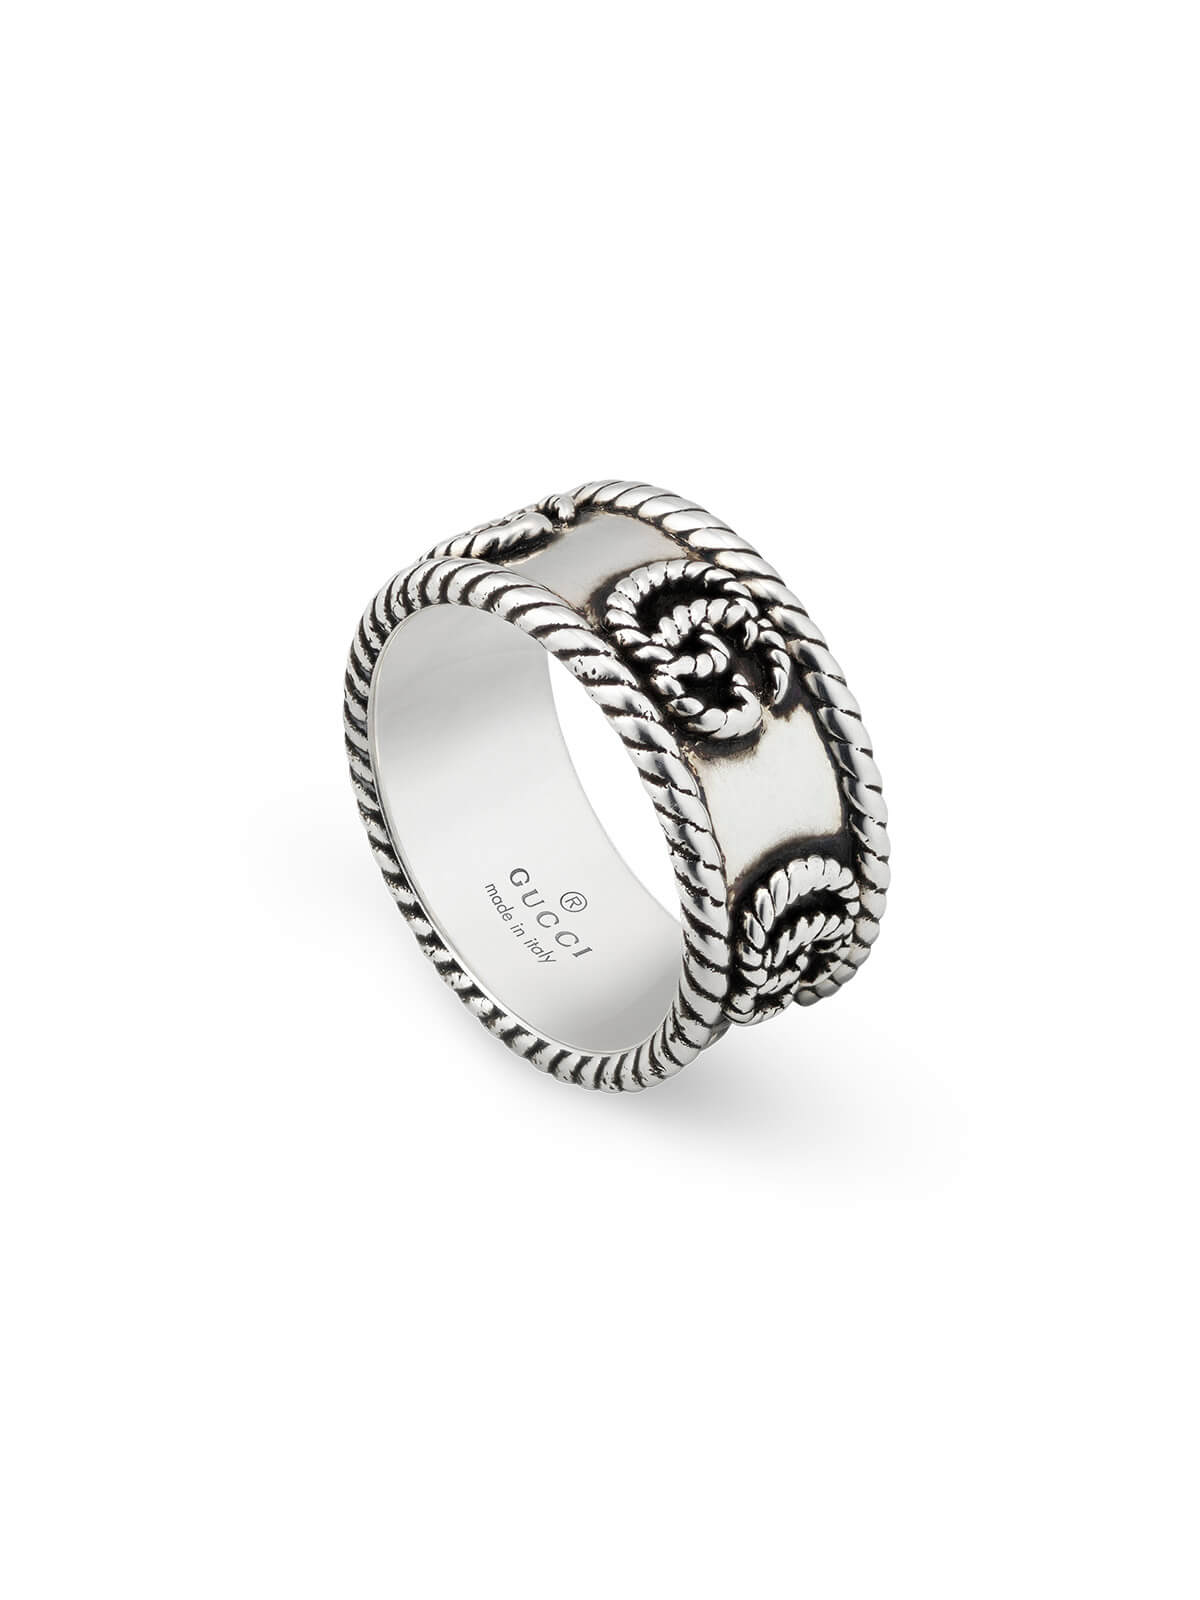 Gucci GG Marmont Ring in Silver - Size Q-R YBC627729001018